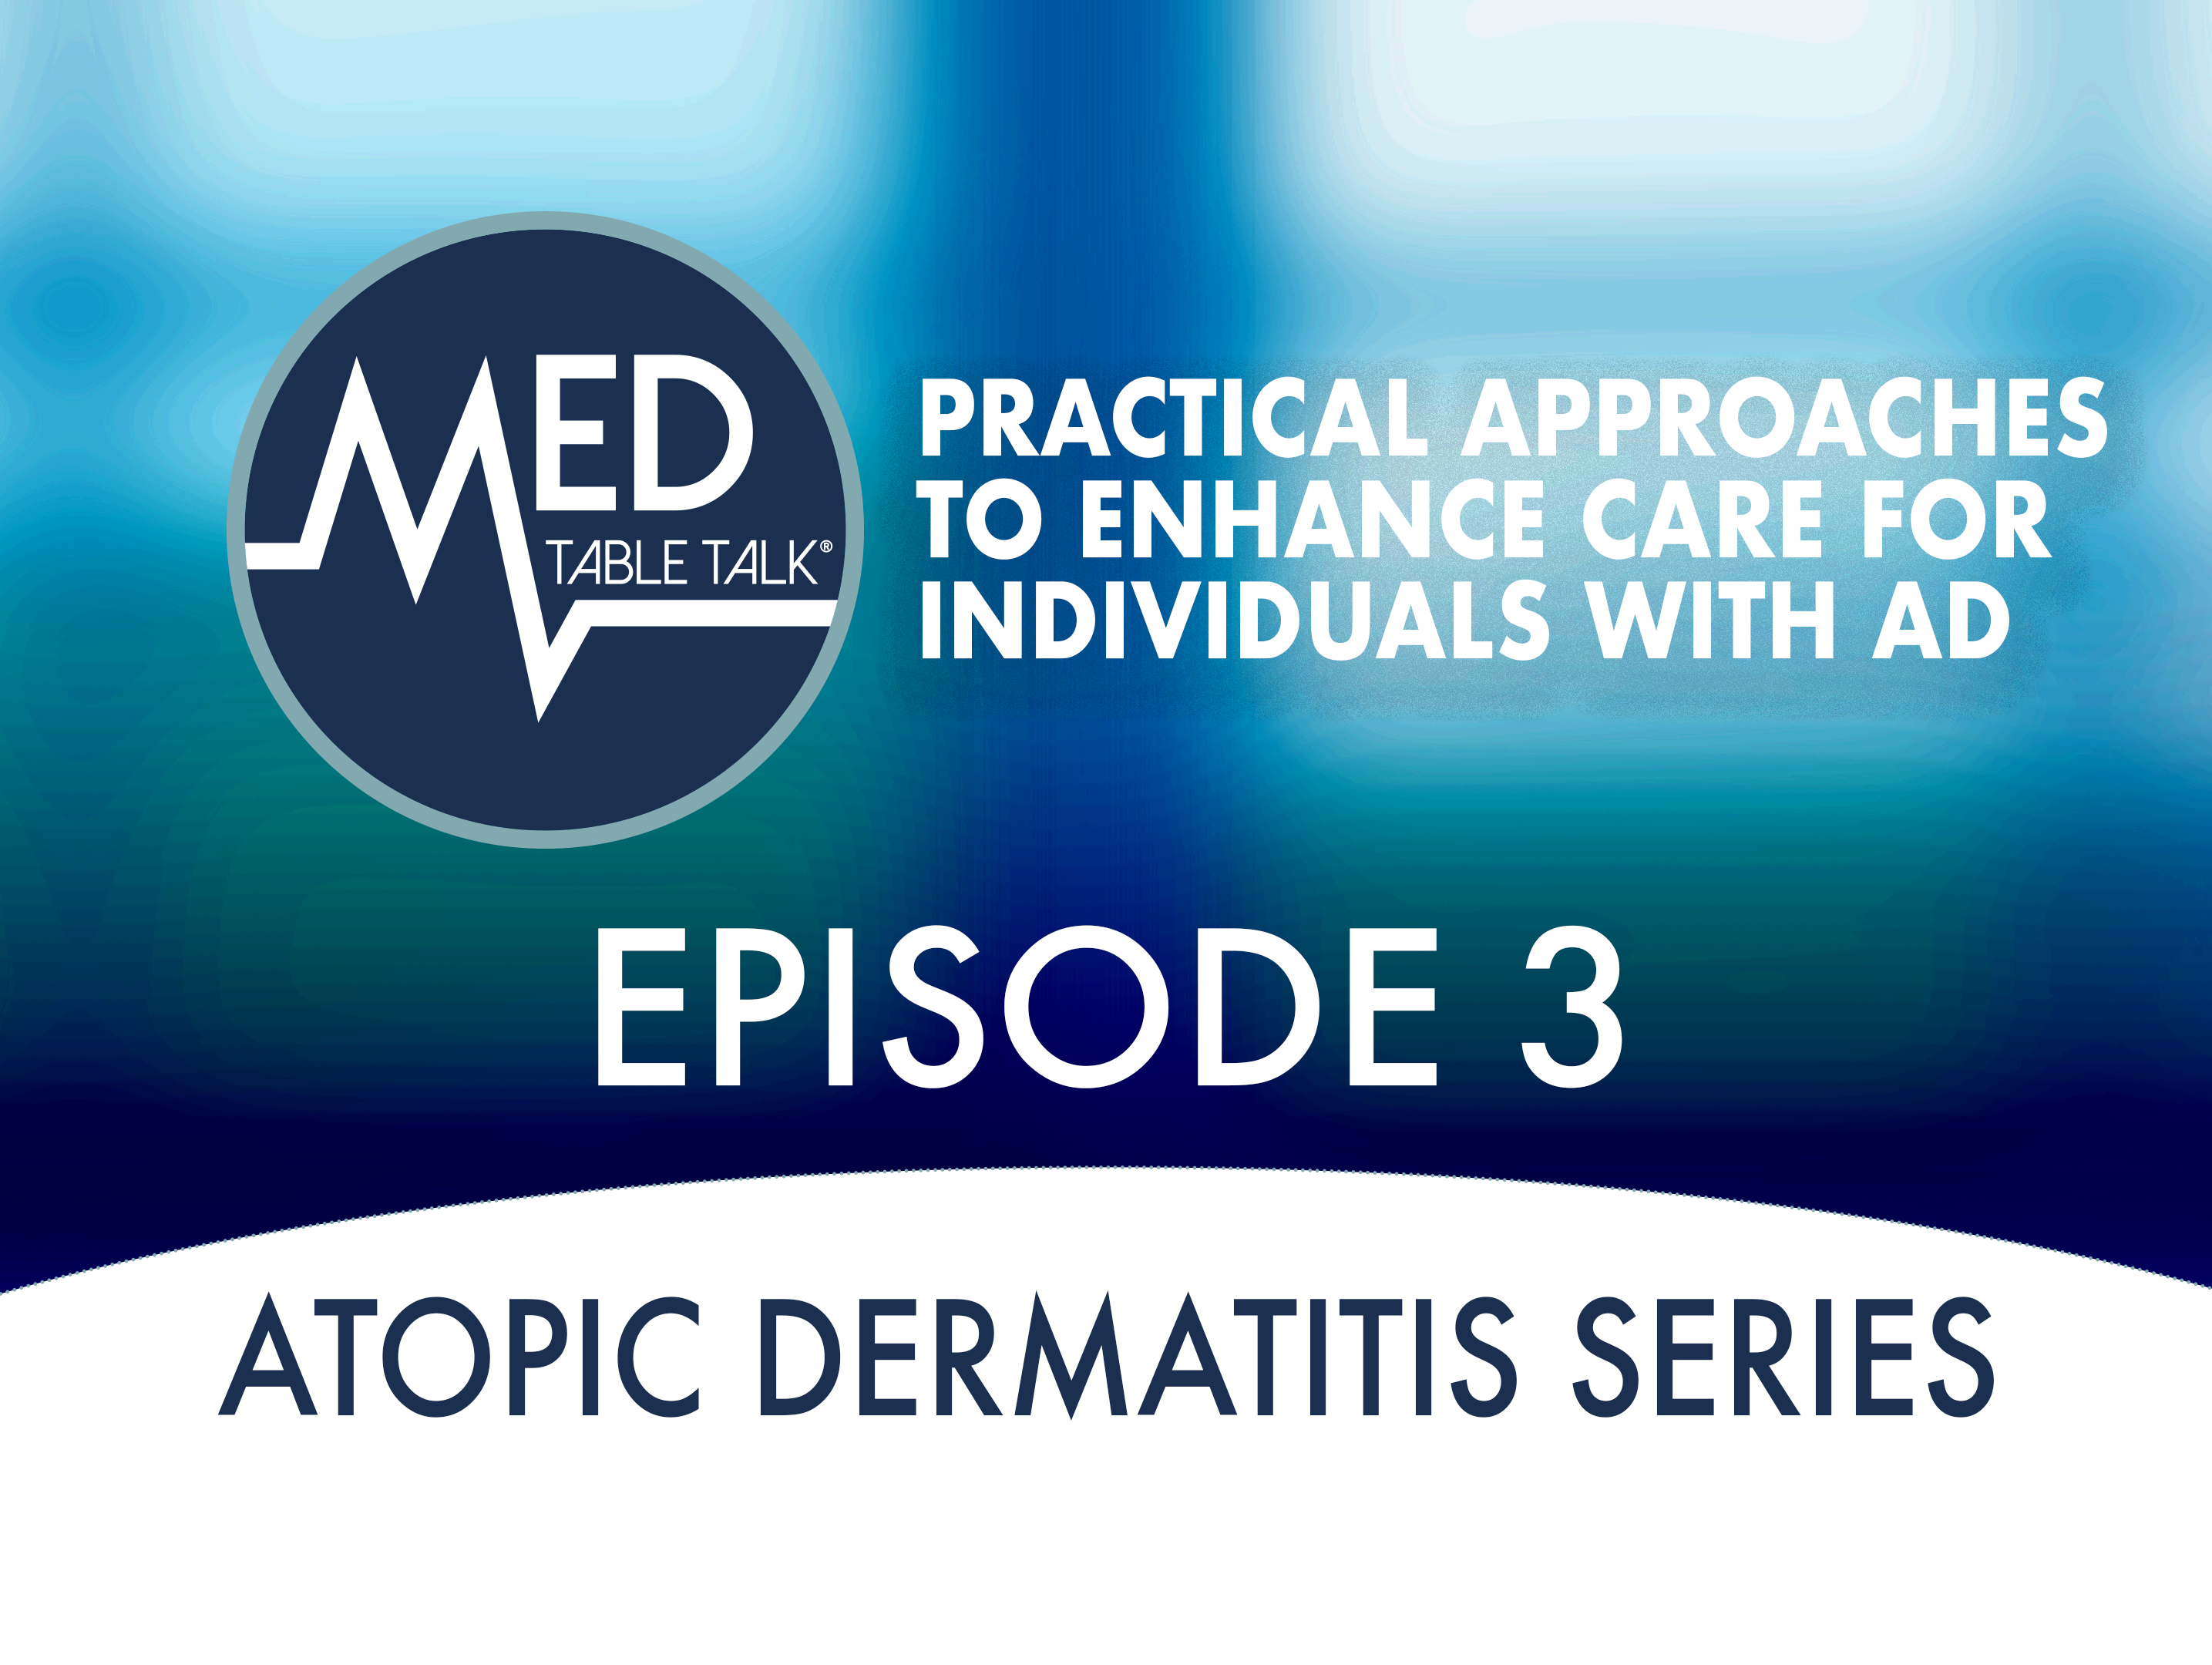 Episode 3 - Practical Approaches to Enhance Care for Individuals With AD:  A Med Table Talk™: Targeted Therapy in Atopic Dermatitis Series